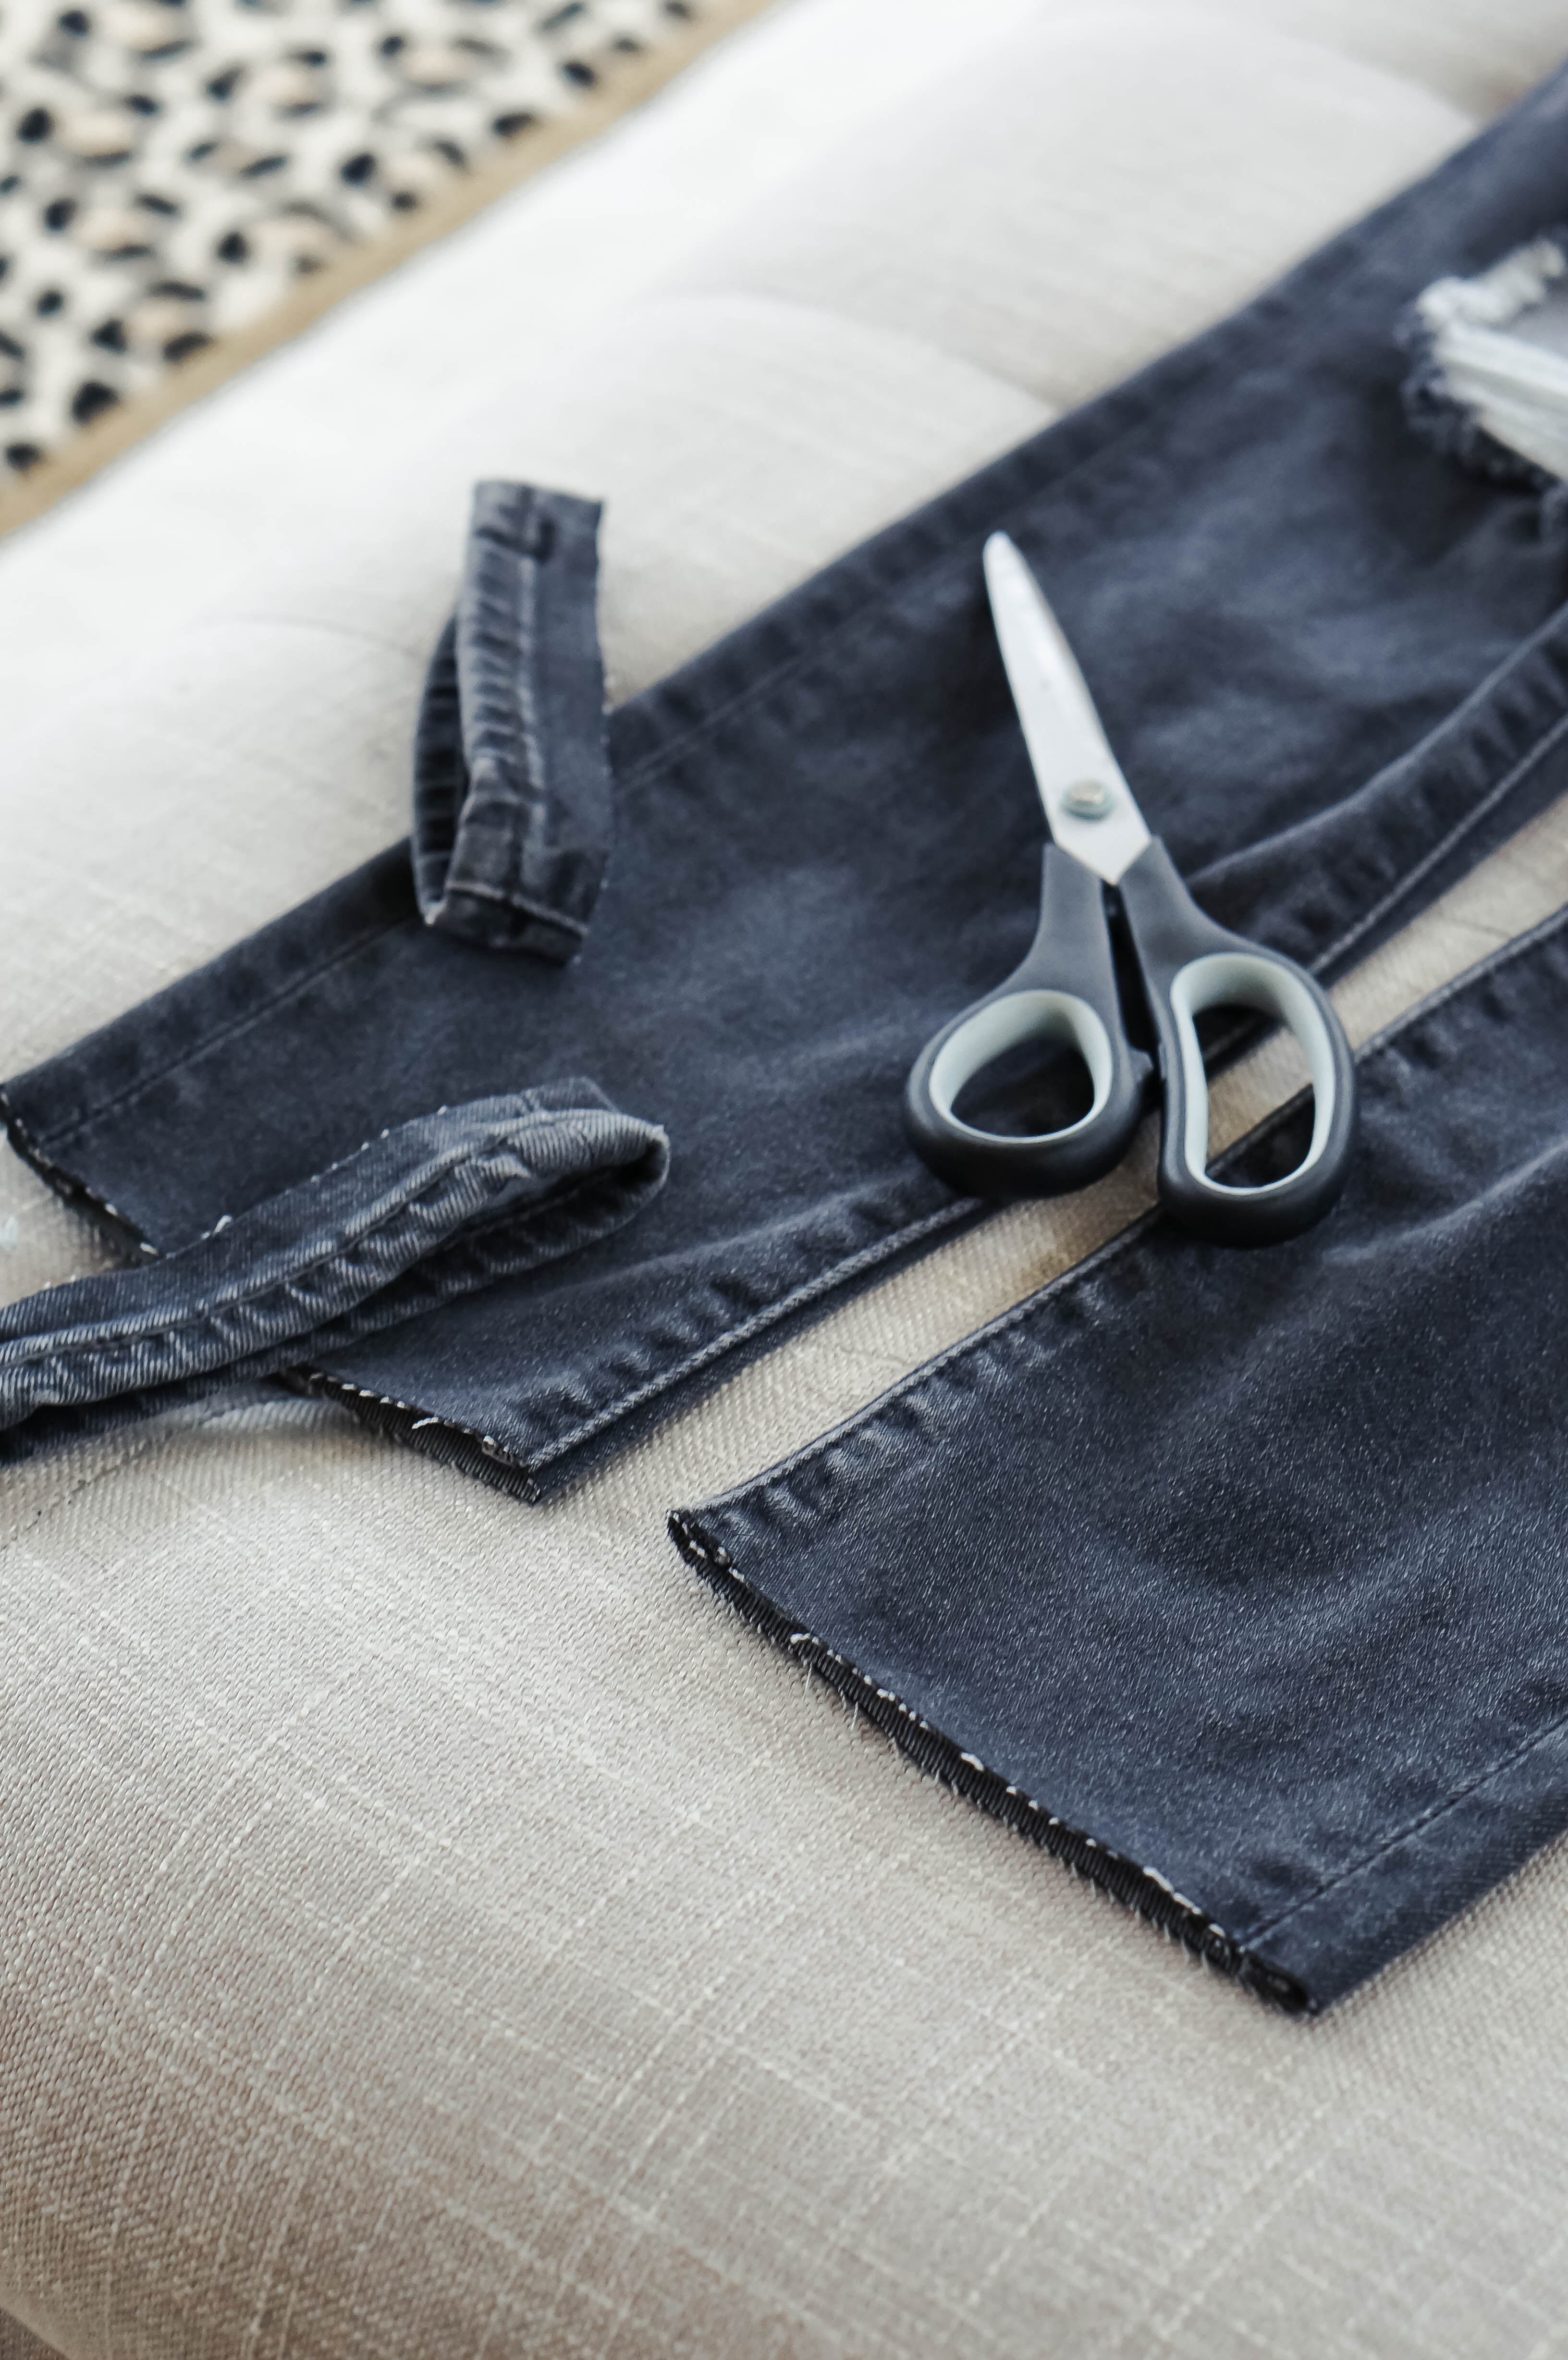 How to Cut the Hem Off jeans